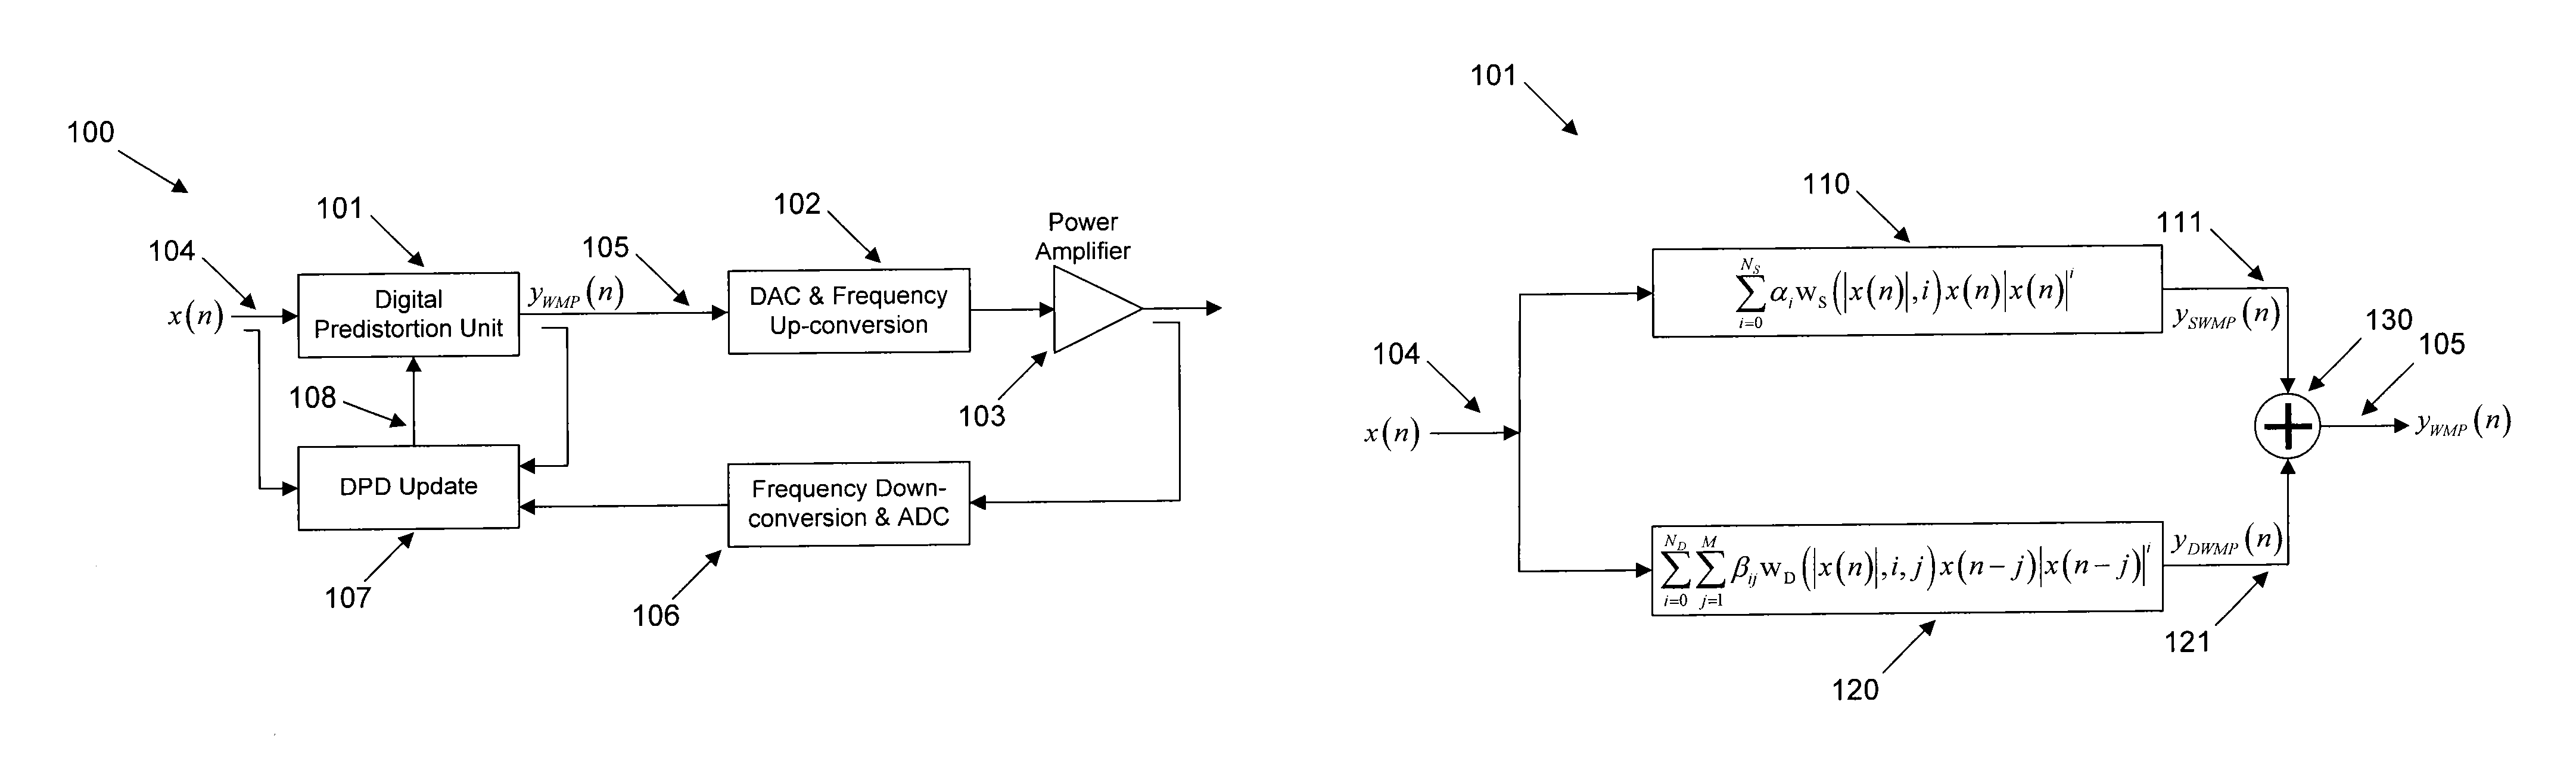 Weighted memory polynomial method and system for power amplifiers predistortion